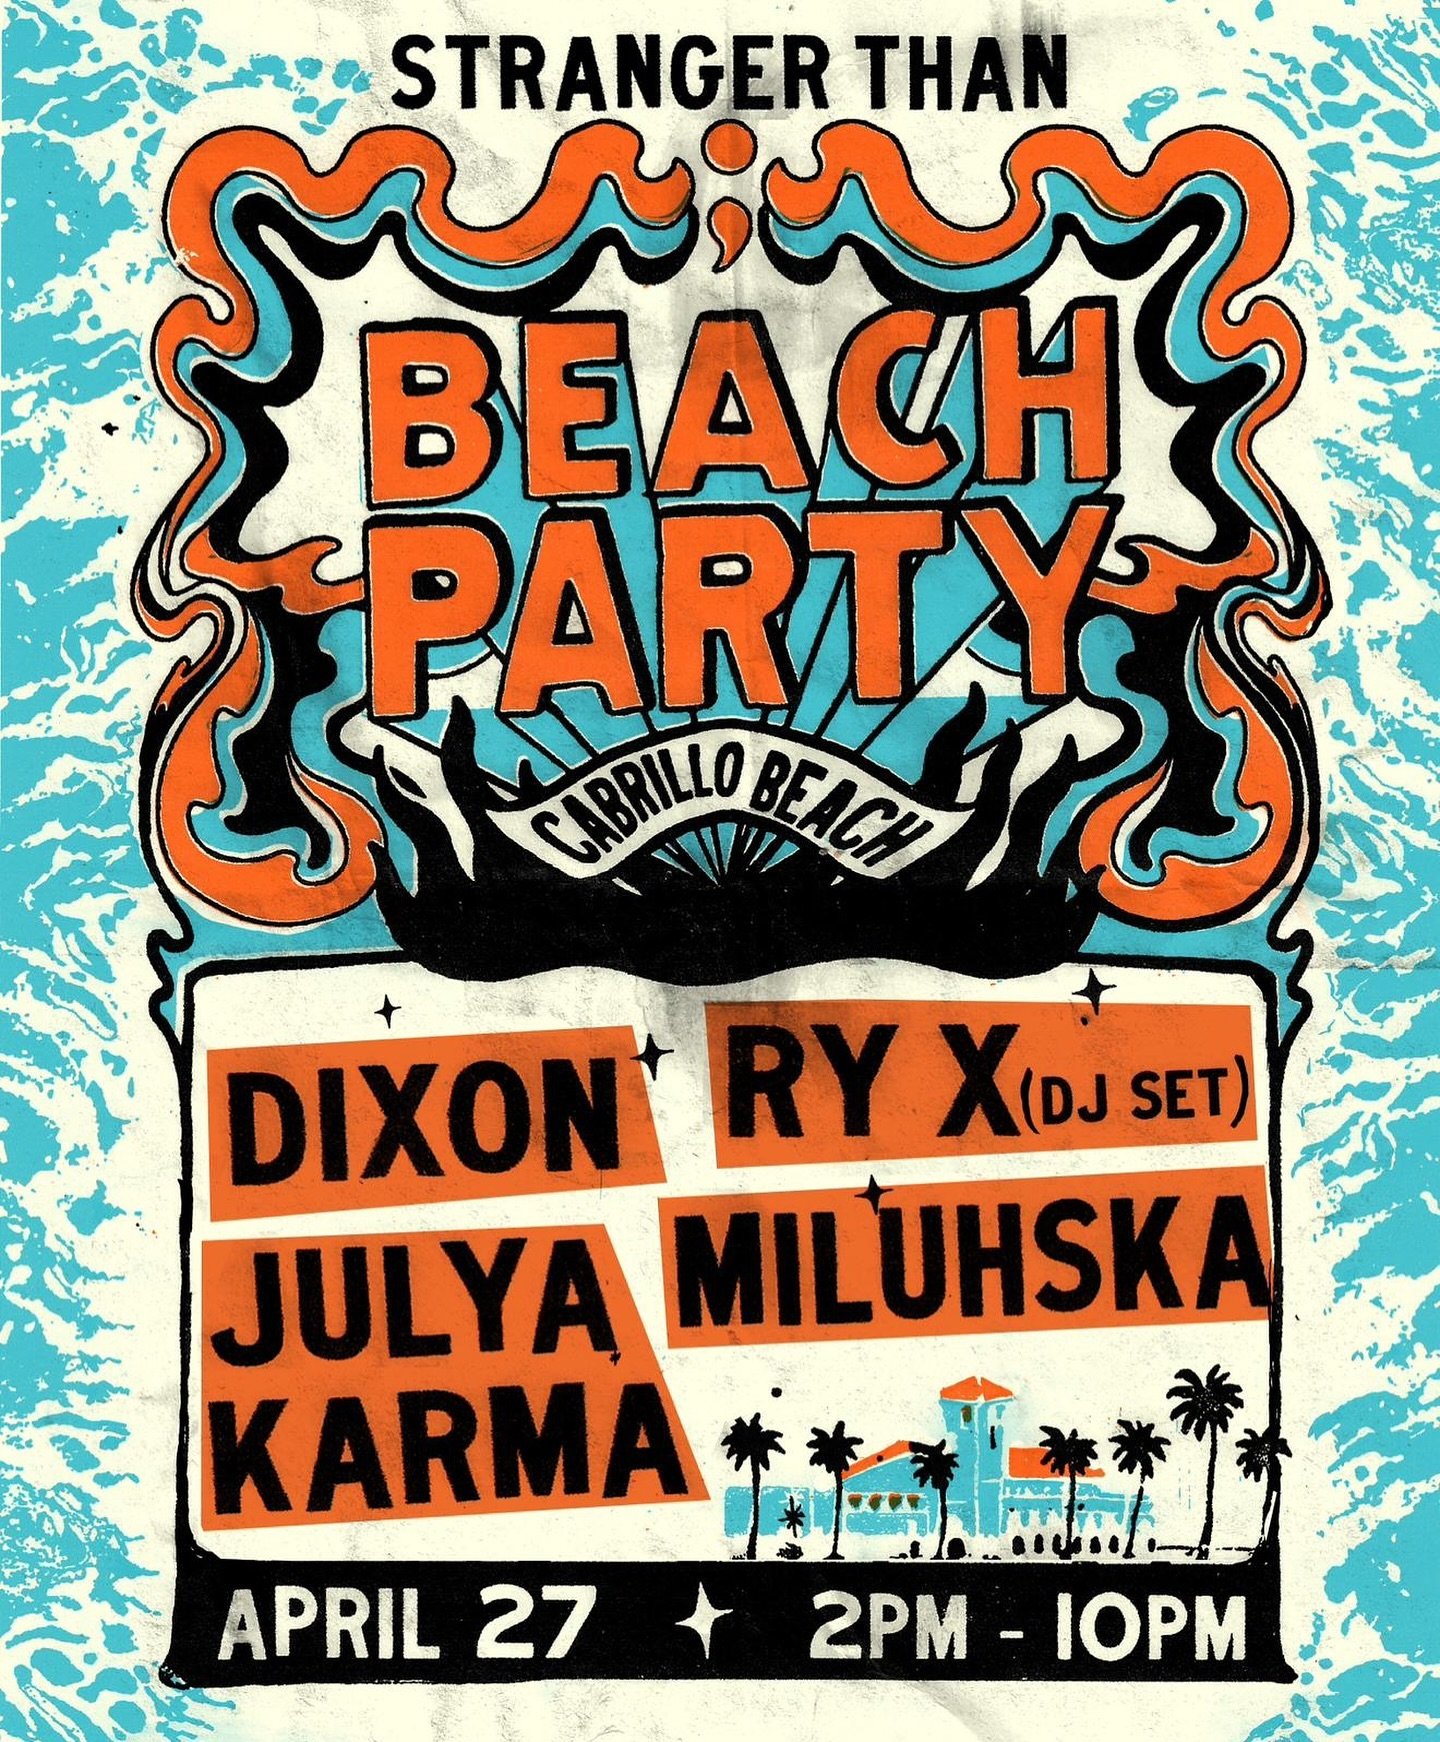 Los Angeles! Next Saturday! Beautiful beach party with @dixon_ @ryx (DJSet) @julya_karma and @miluhska !
It will be special! Let&rsquo;s do it together!